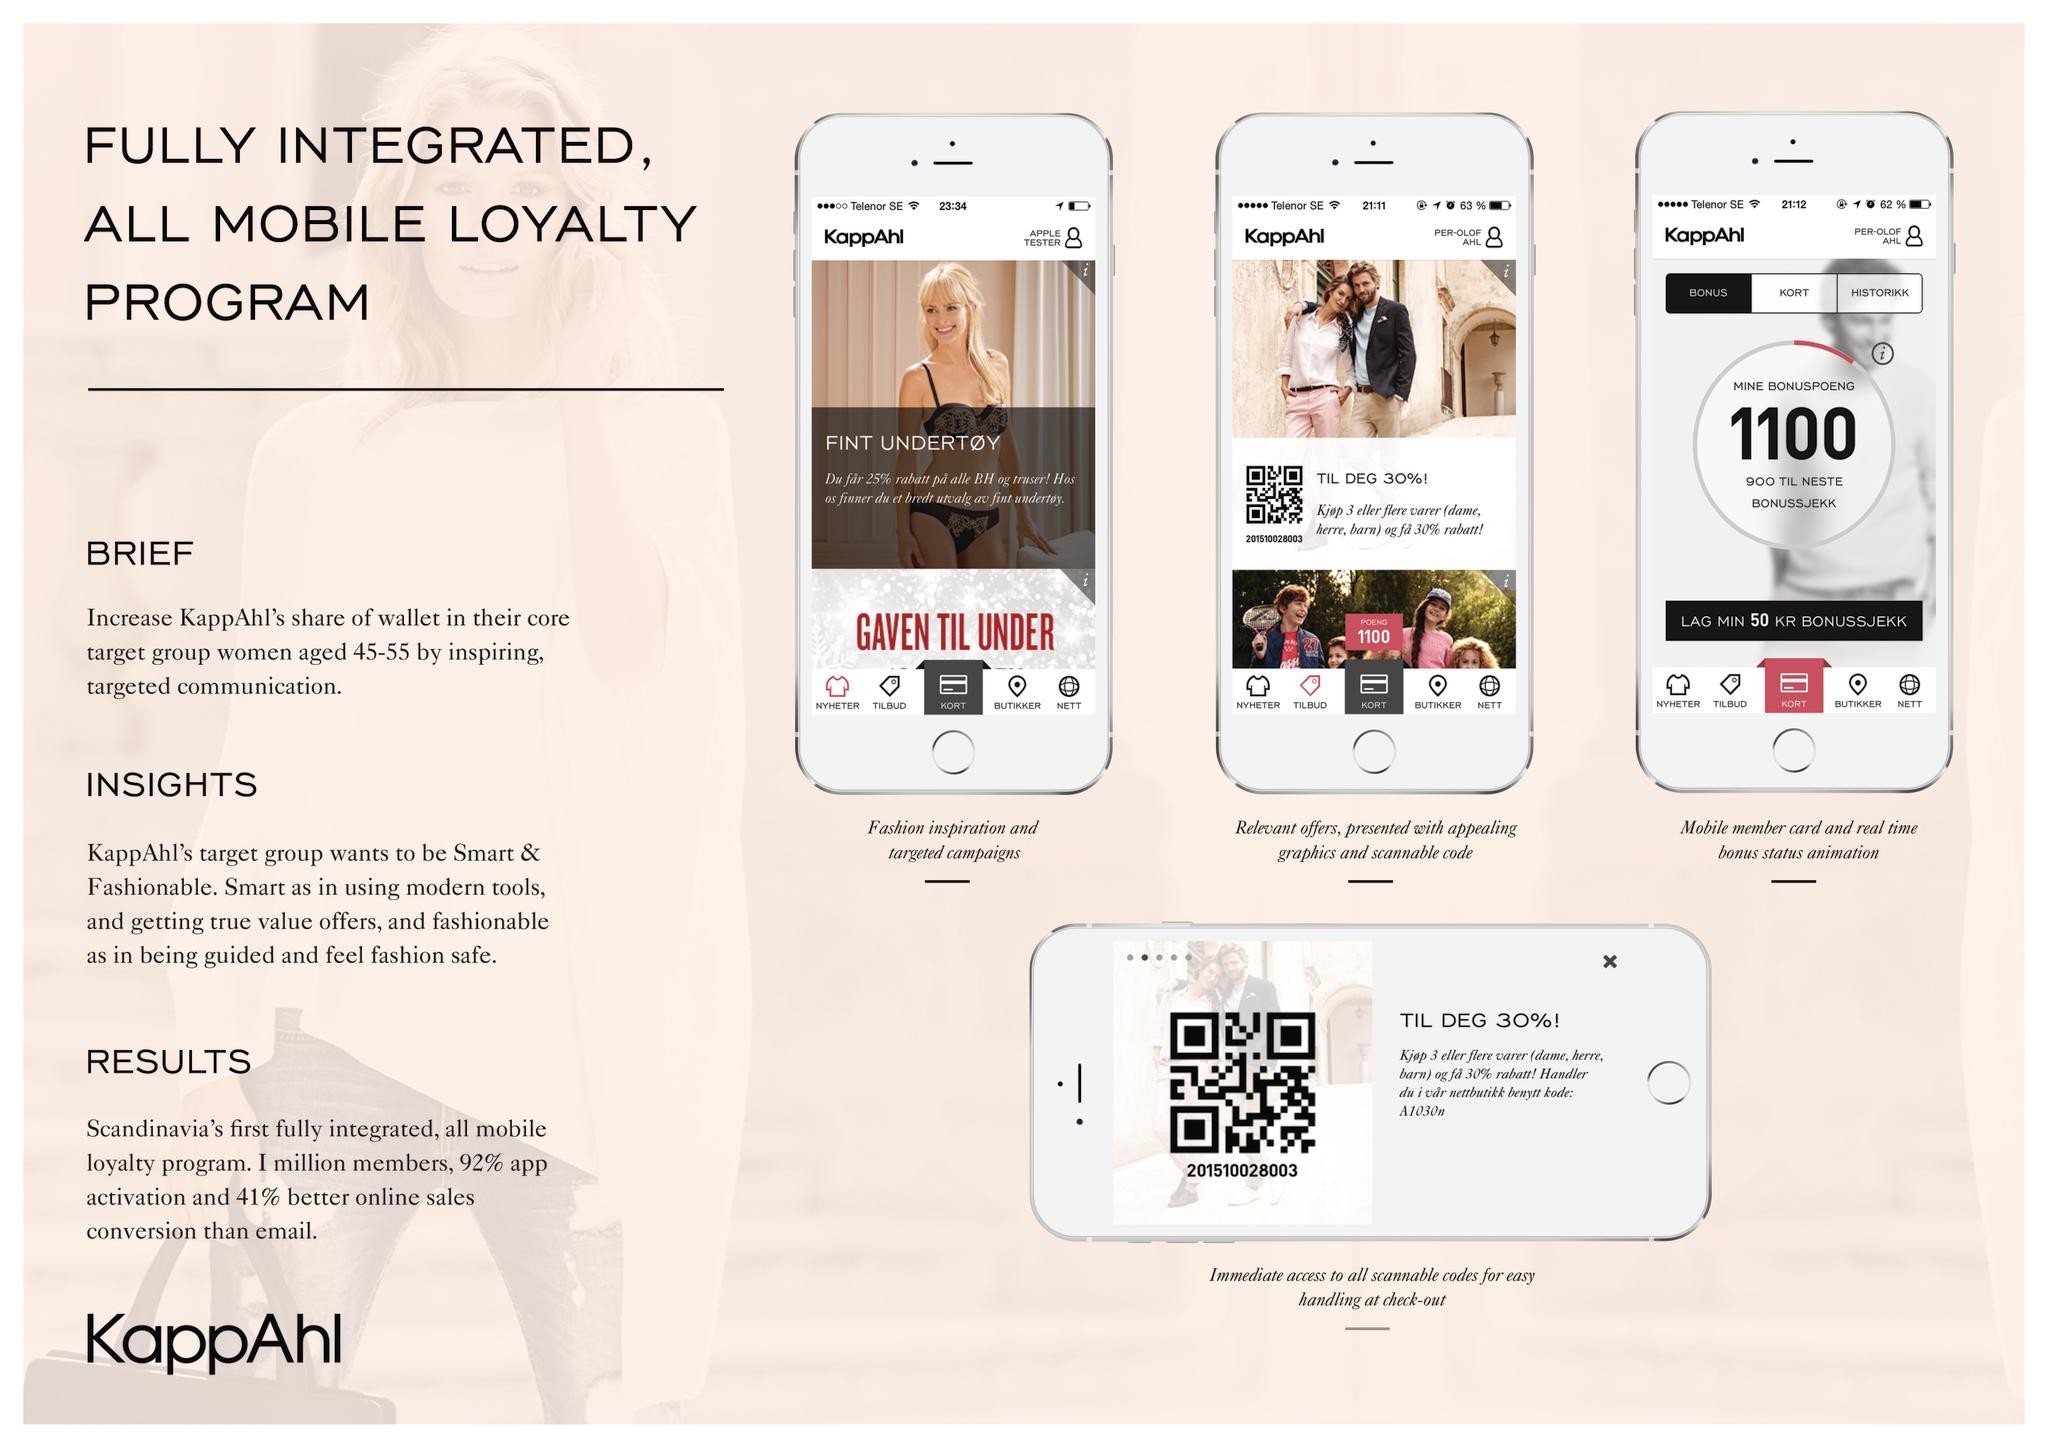 FULLY INTEGRATED, ALL MOBILE LOYALTY PROGRAM